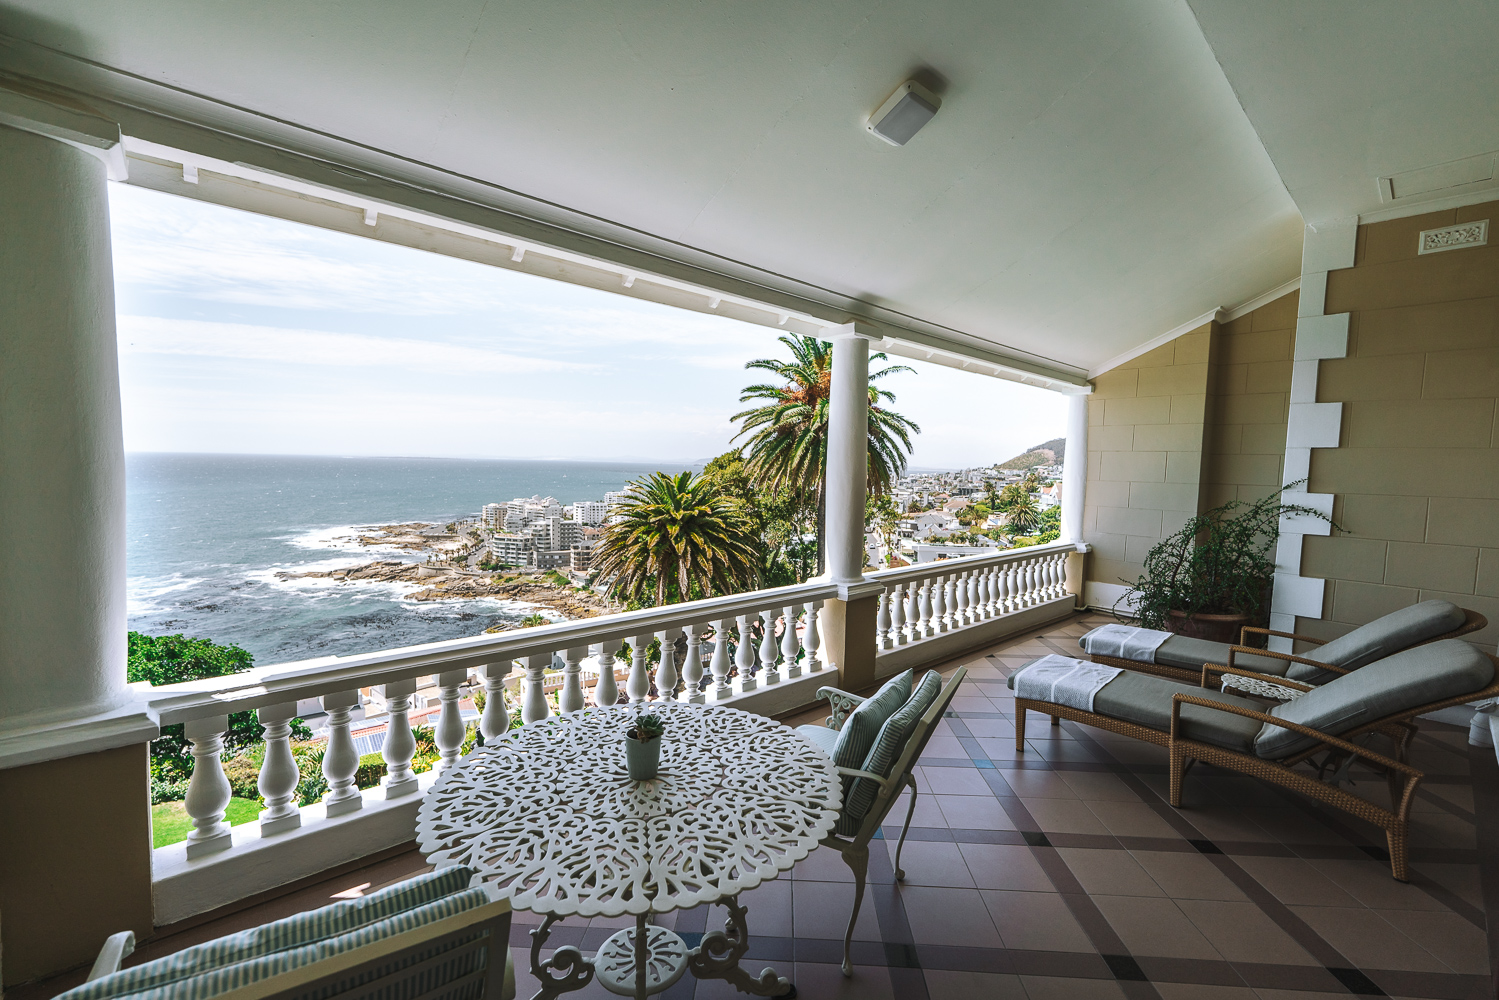 Terrace in the Deluxe House Room at Ellerman House